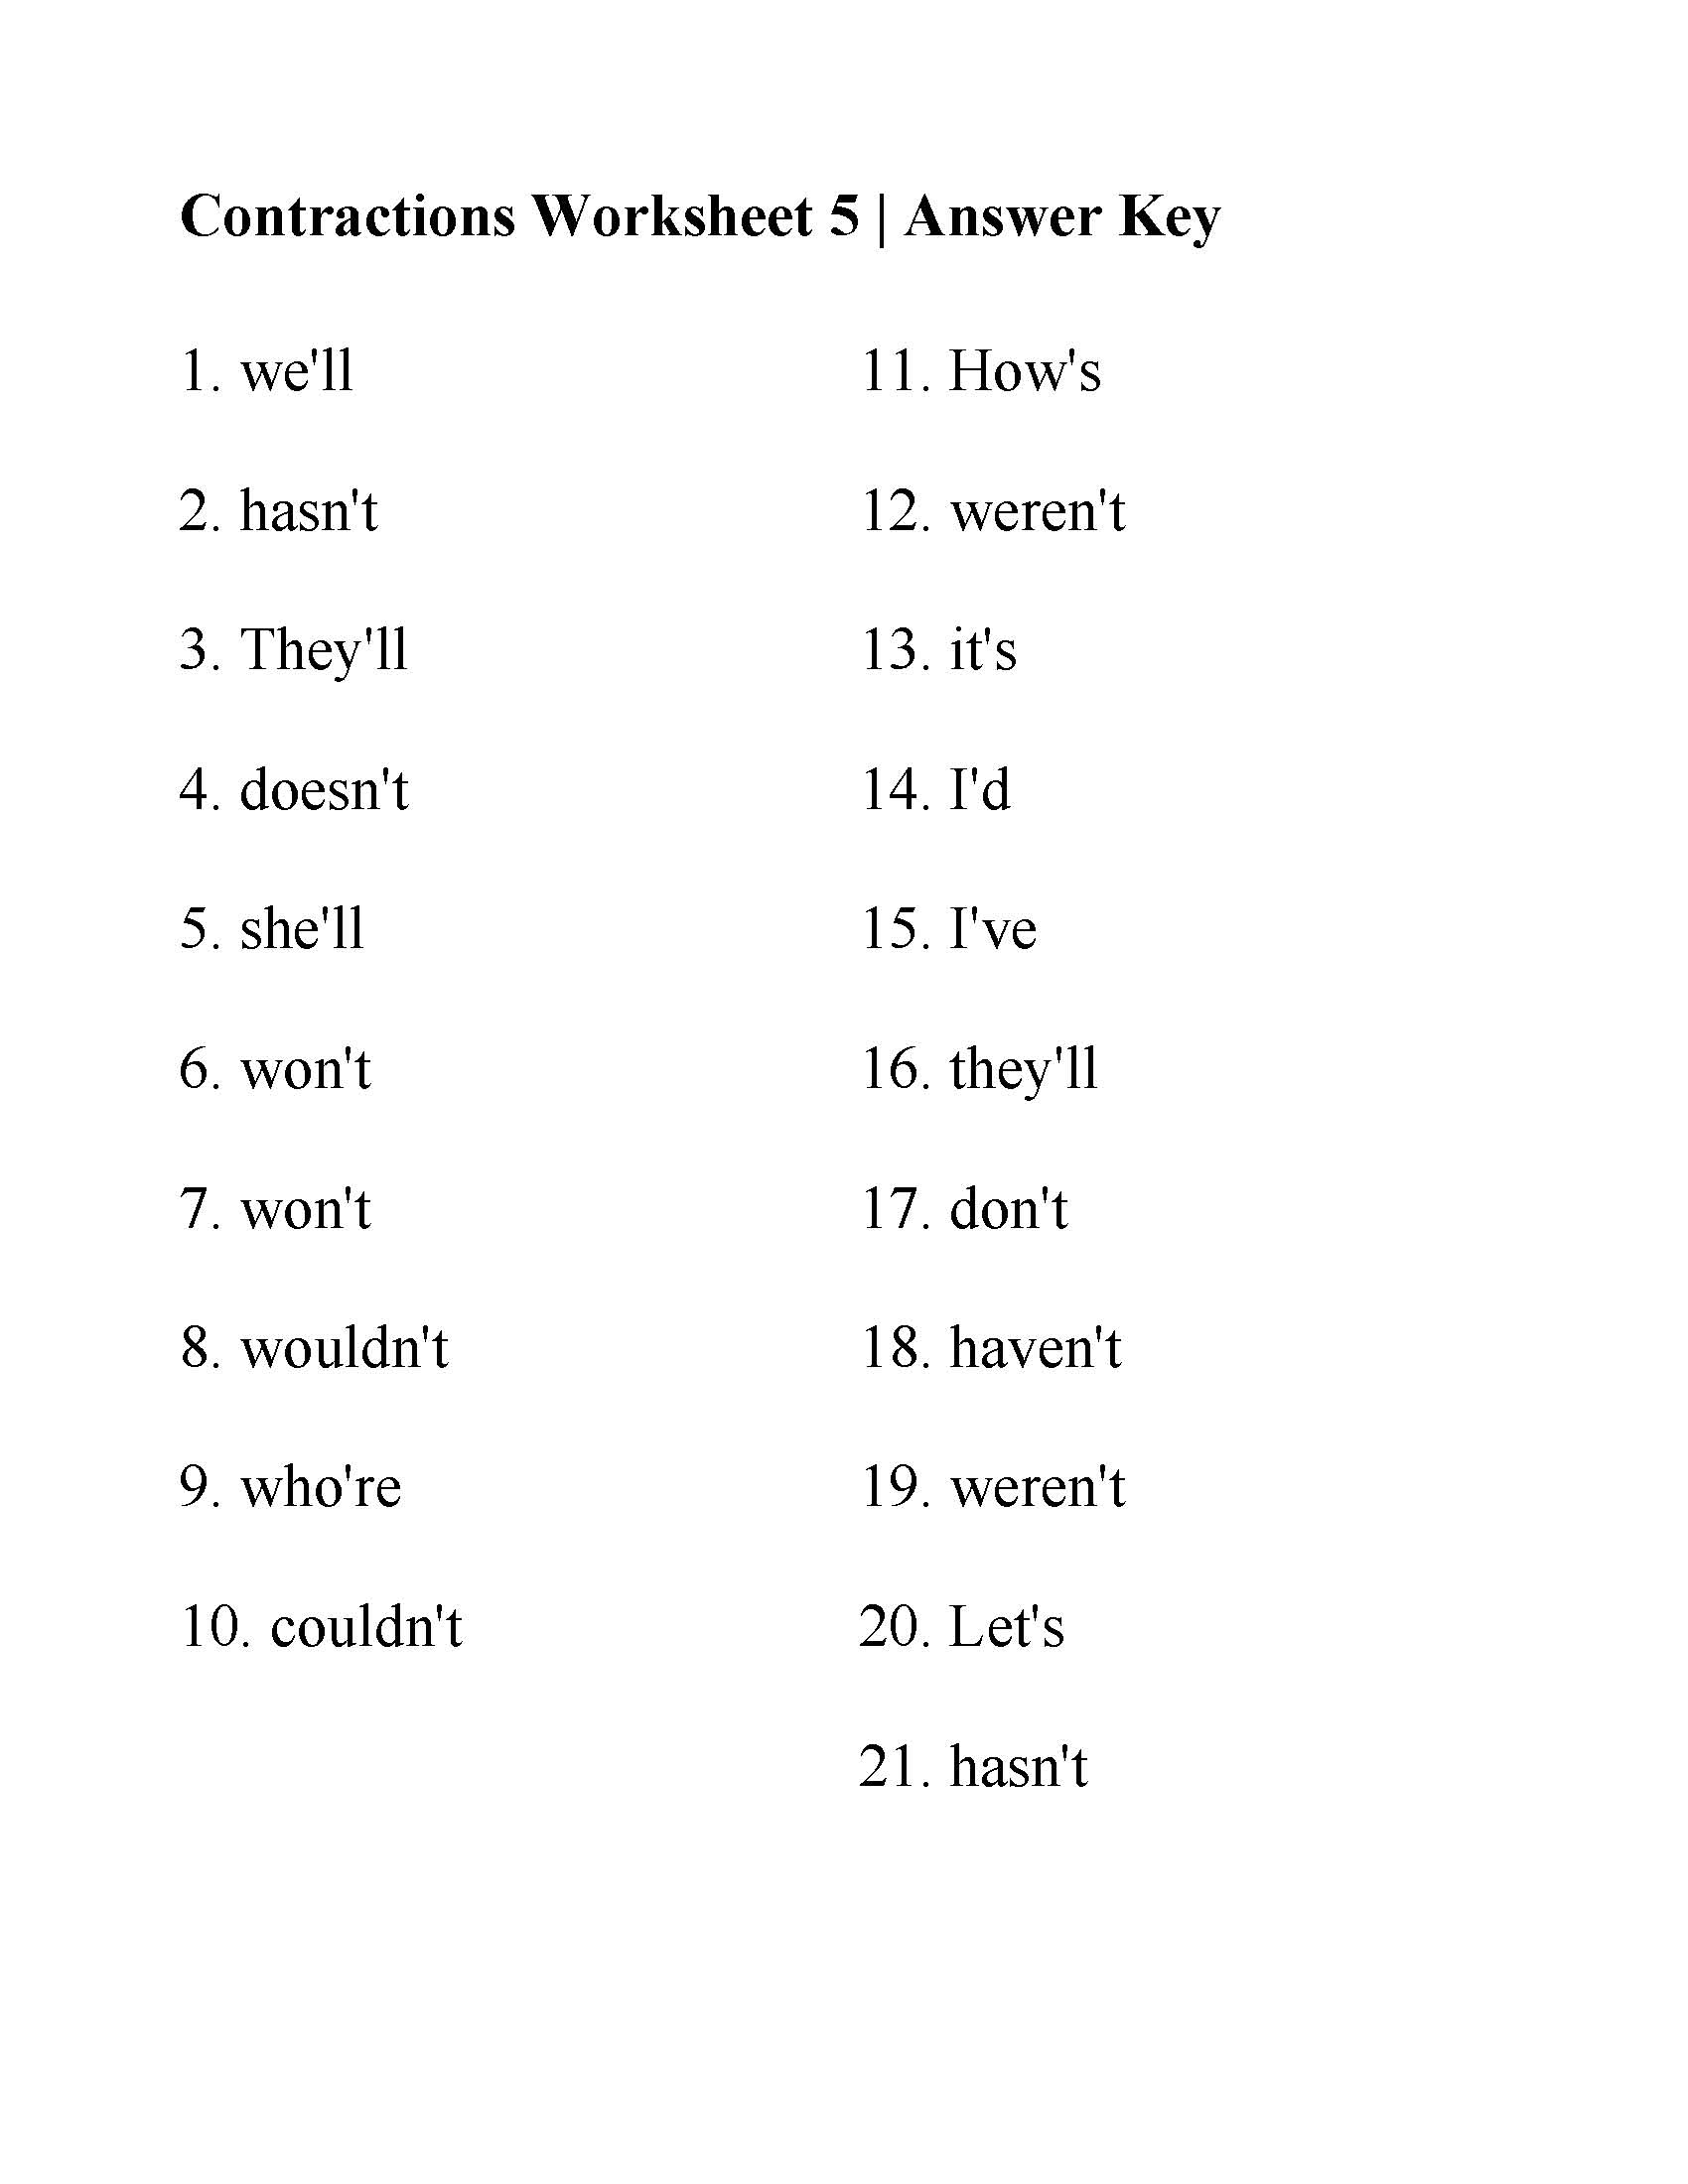 This is a preview image of Contractions Worksheet 5. Click on it to enlarge it or view the source file.